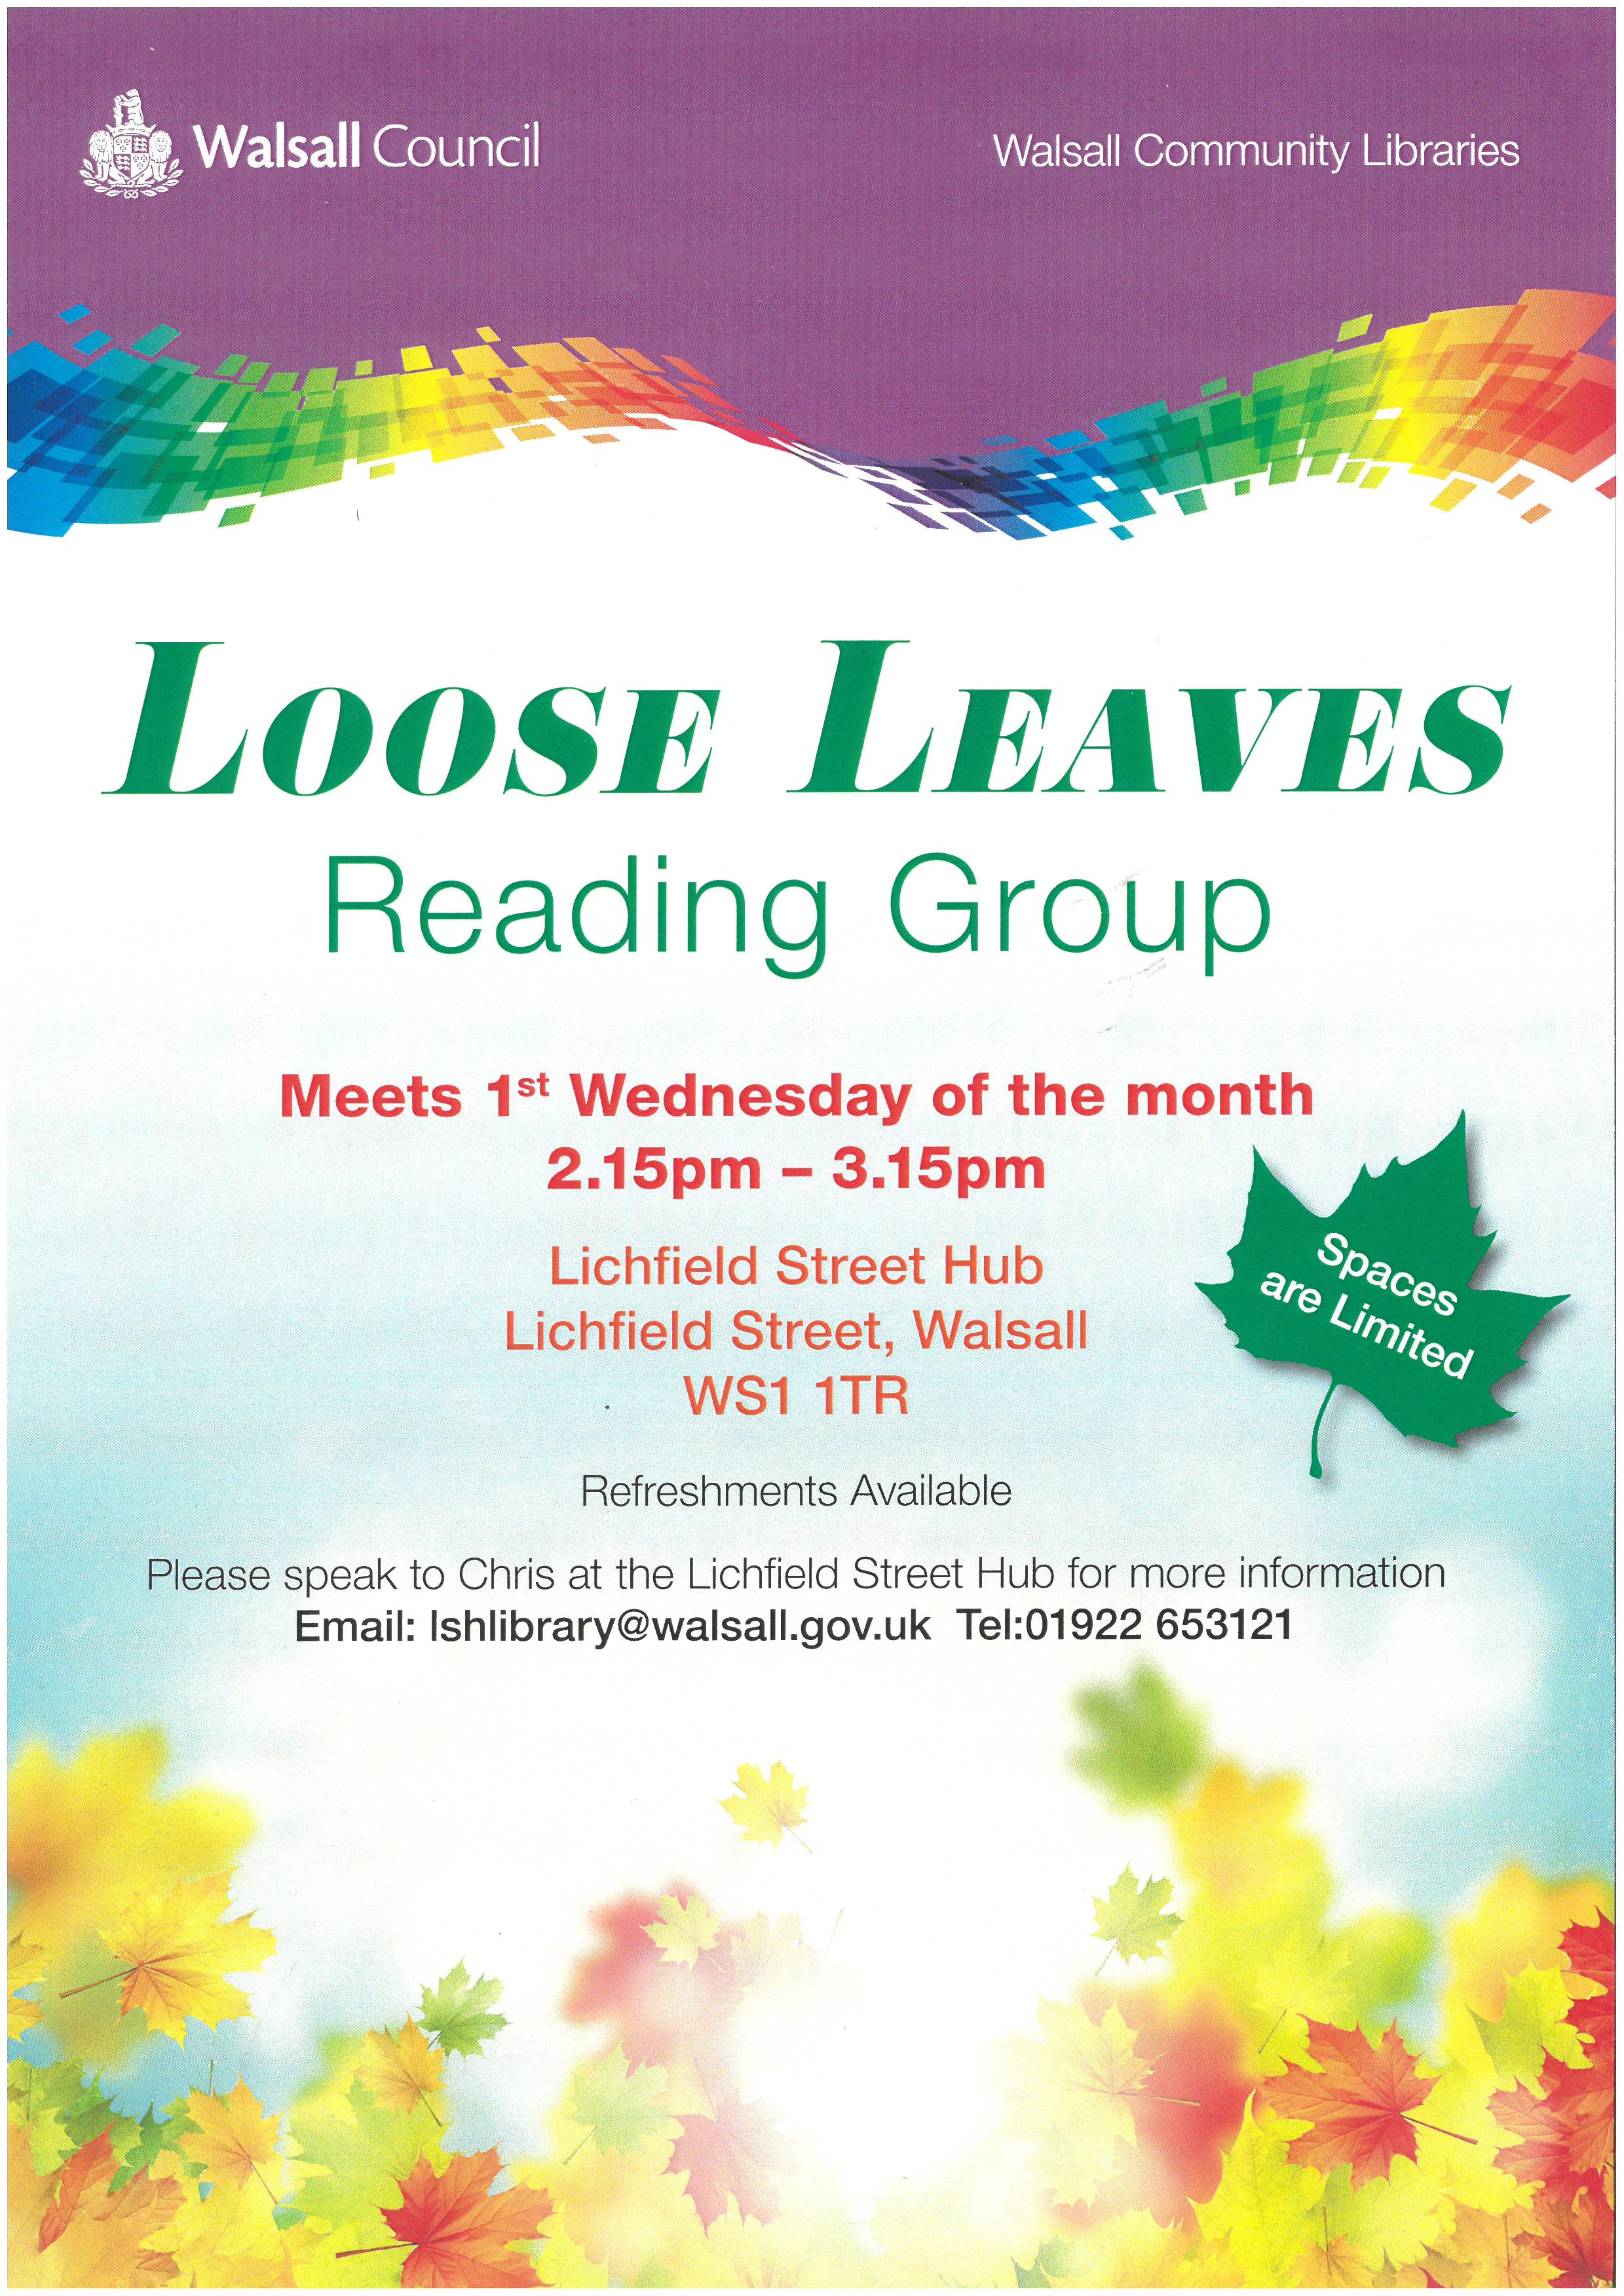 Flyer for the loose leaves reading group